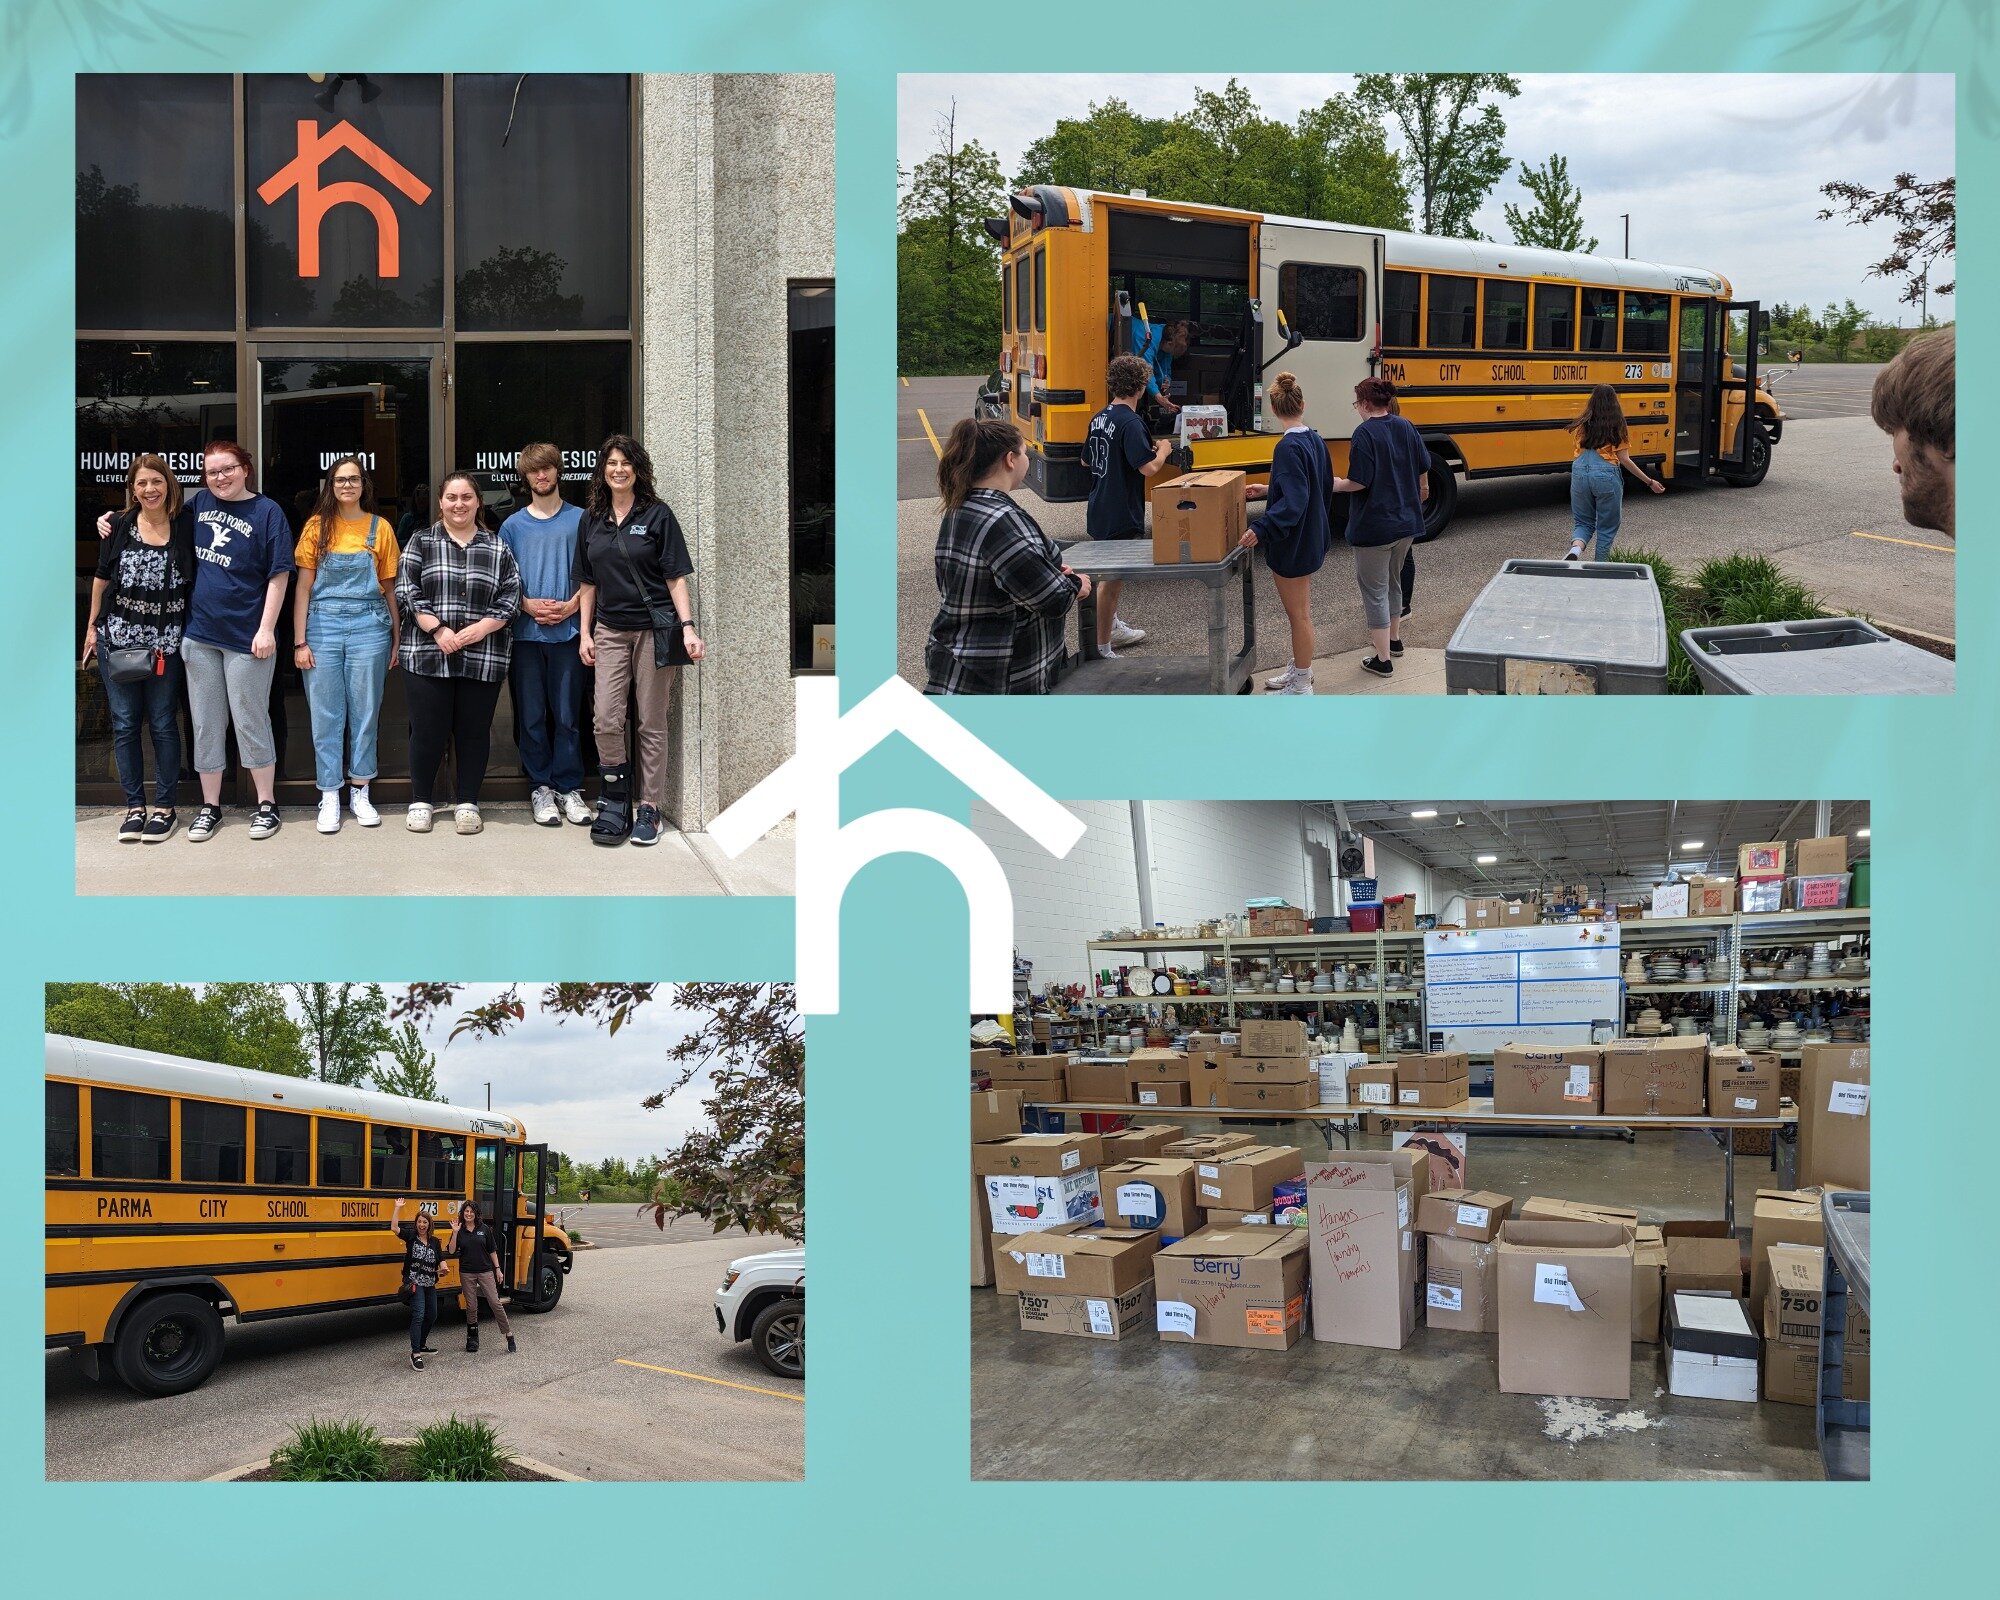 Special shout out to the amazing students and staff @parmaschools for sorting, organizing and delivering wonderful, much needed household goods donated by @oldtimepottery. Thanks also to their awesome store manager, Mary Rice, for supporting this pro